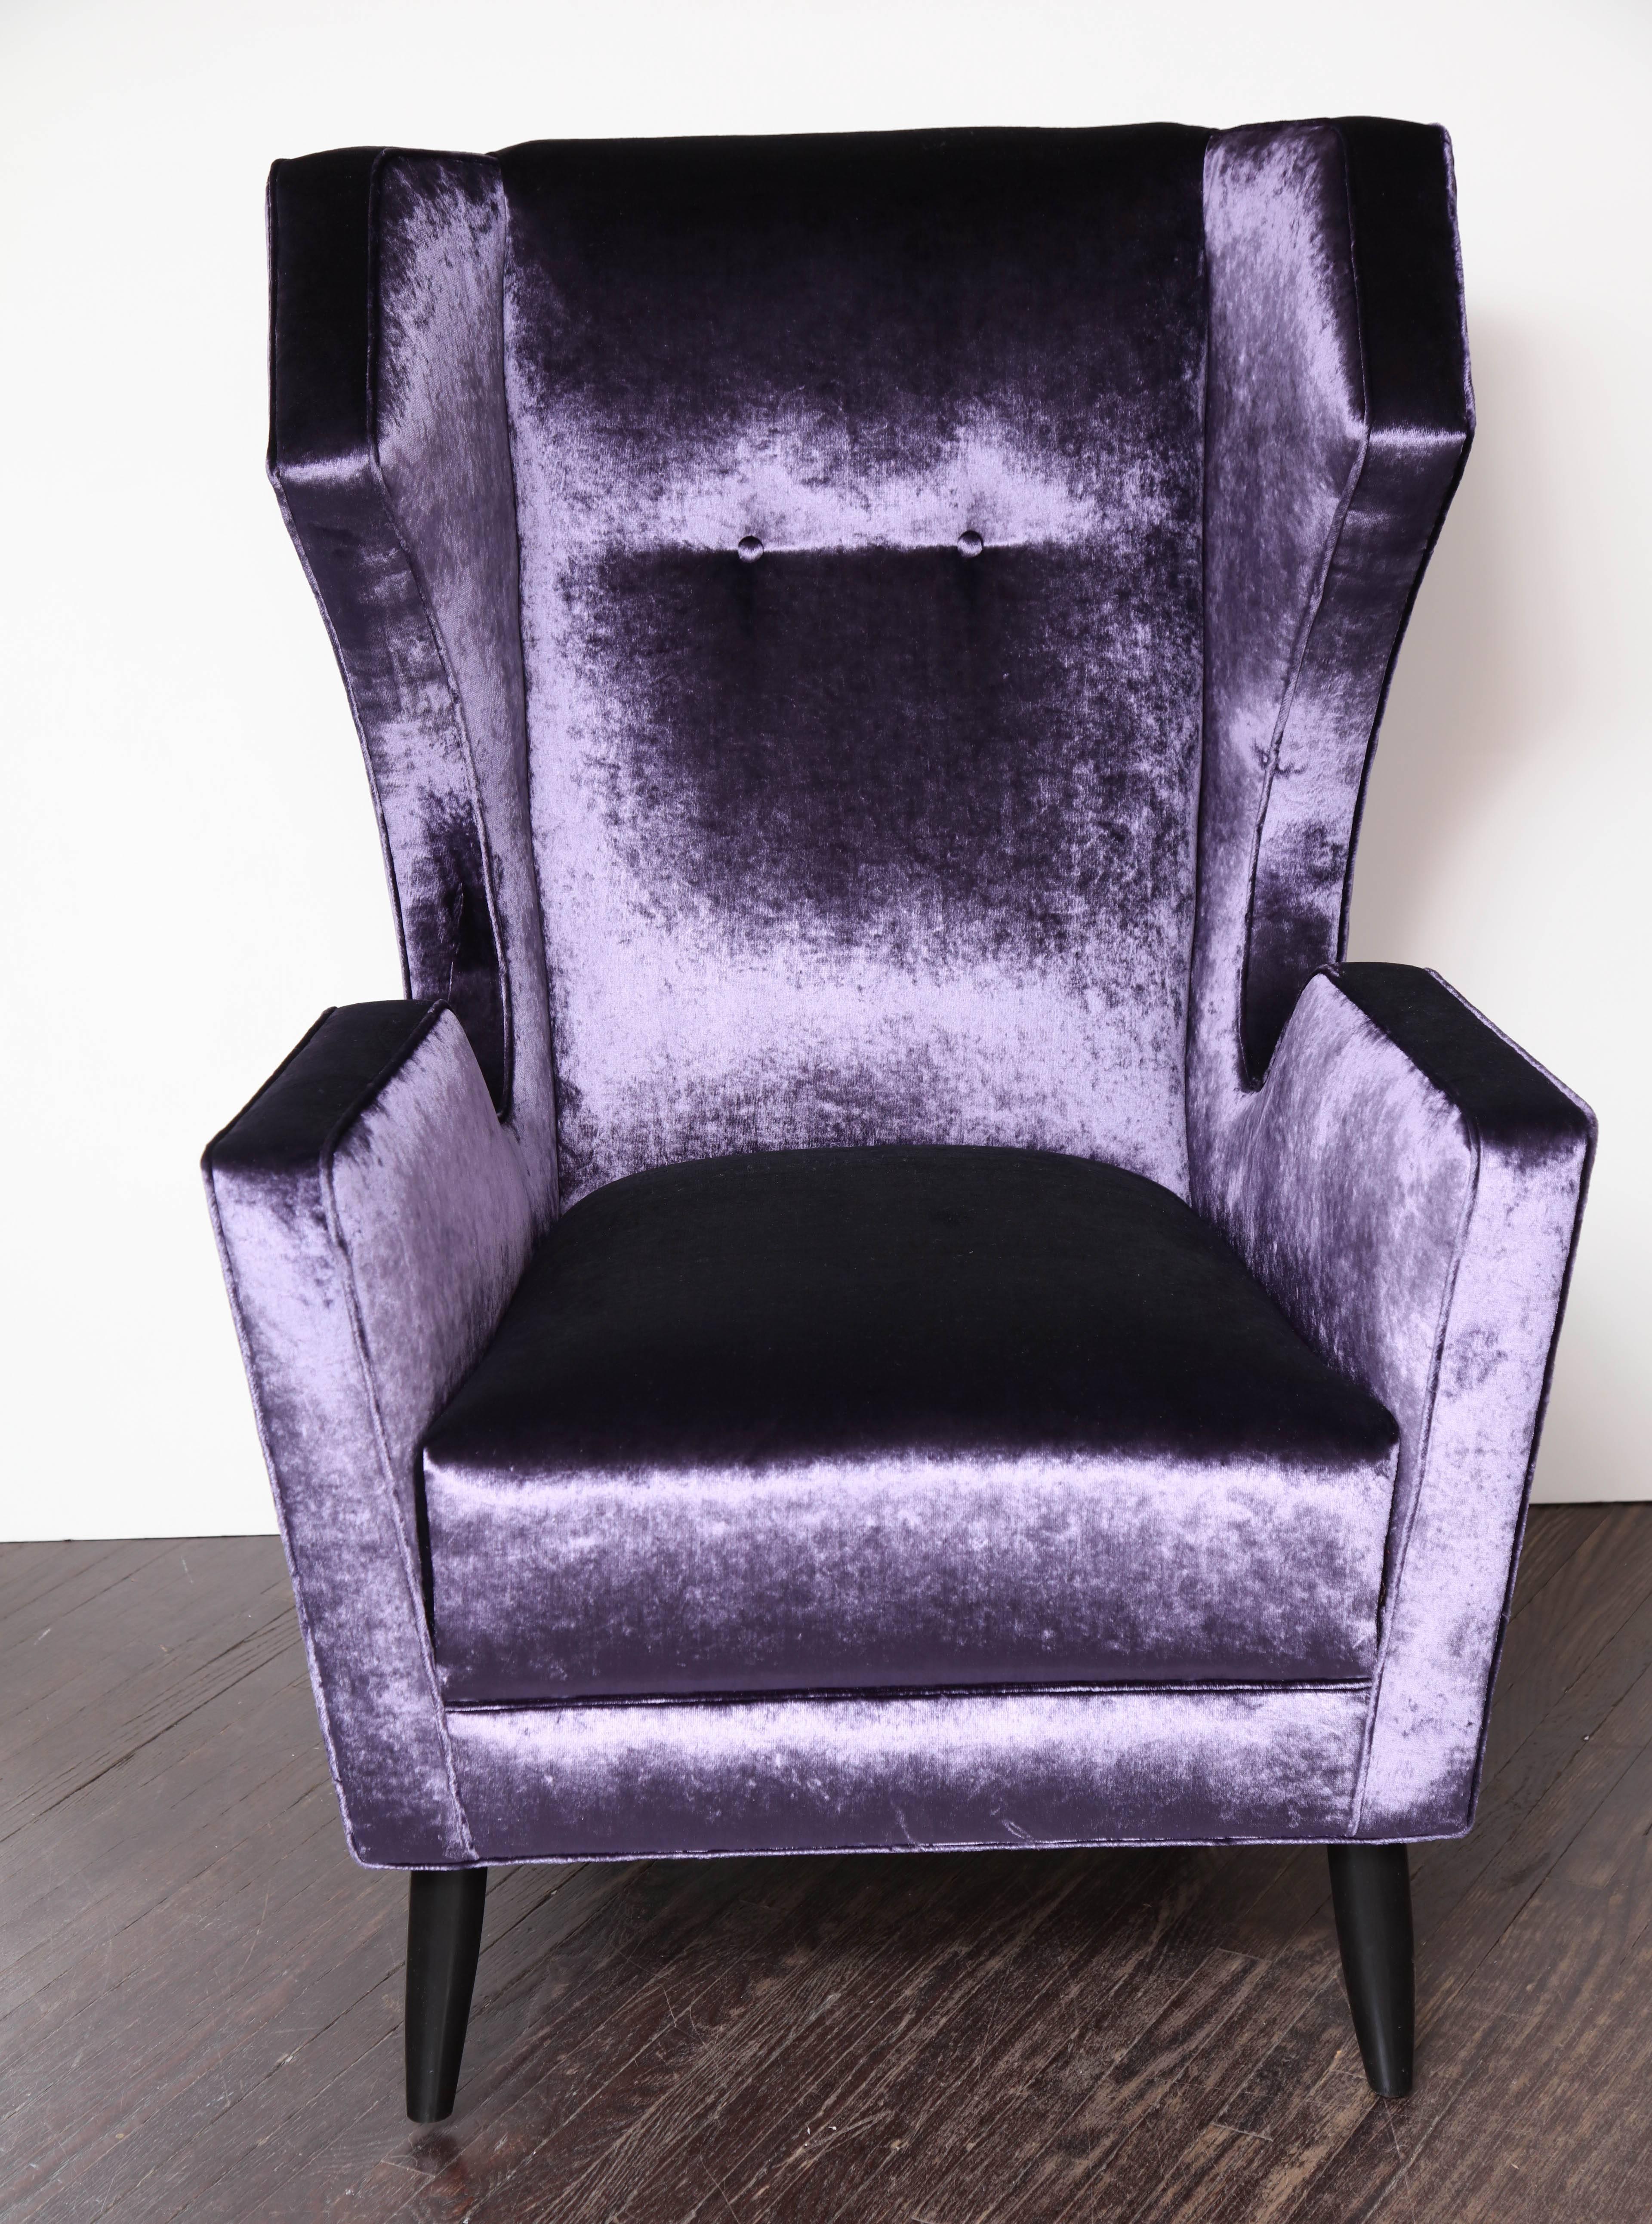 Pair of custom wing chairs in the style of Gio Ponti upholstered in Romo amethyst velvet.